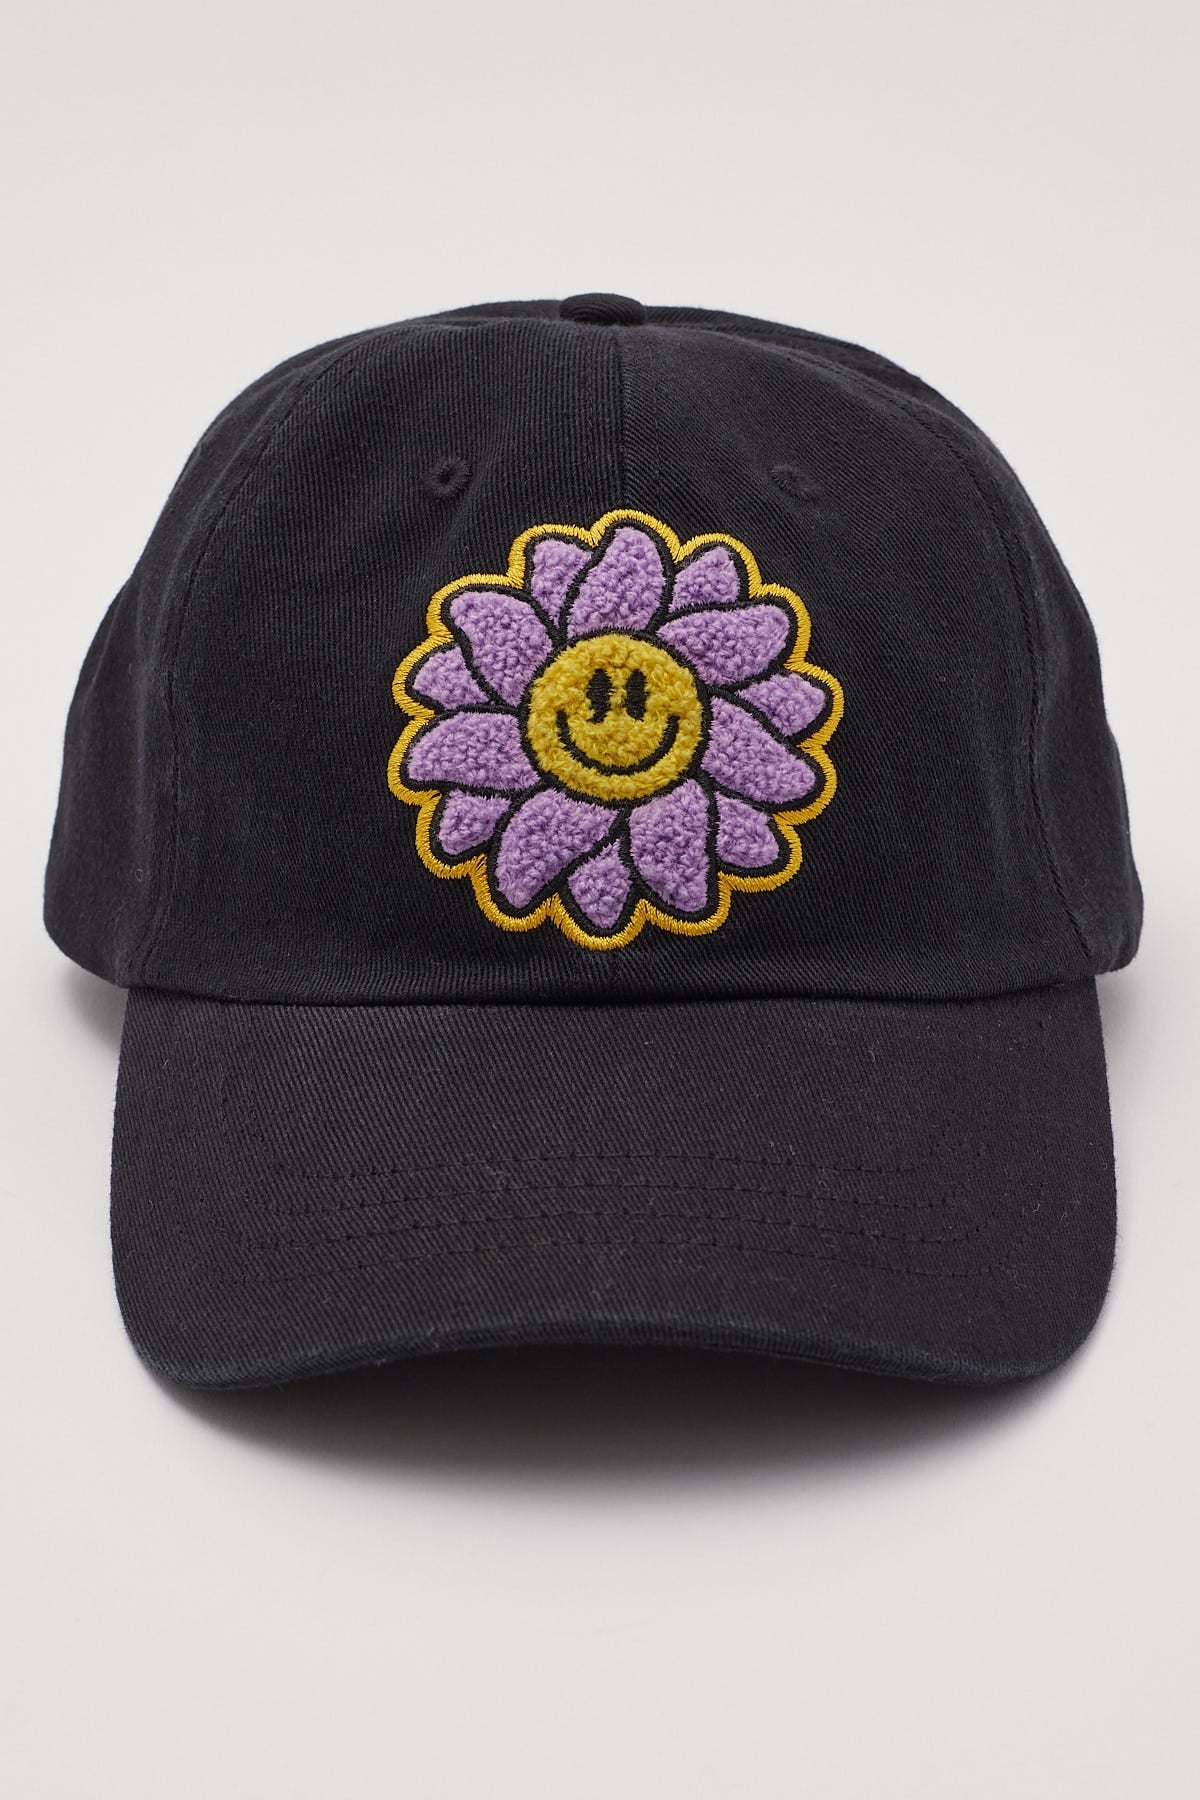 Common Need Cheerful Skate Cap Off Black